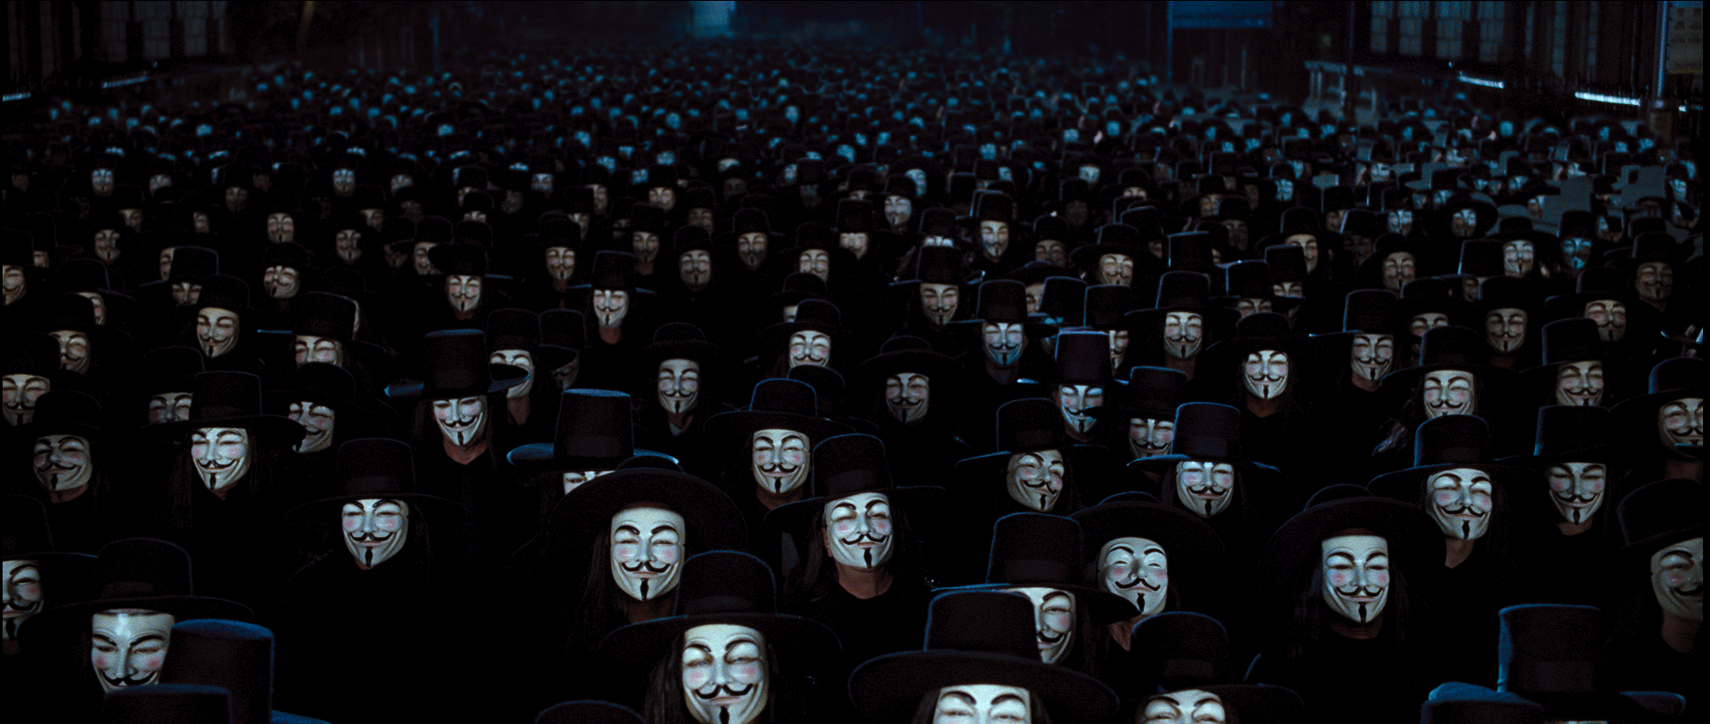 v-for-vendetta-decade-wachowskis-dark-knight-anonymous.png